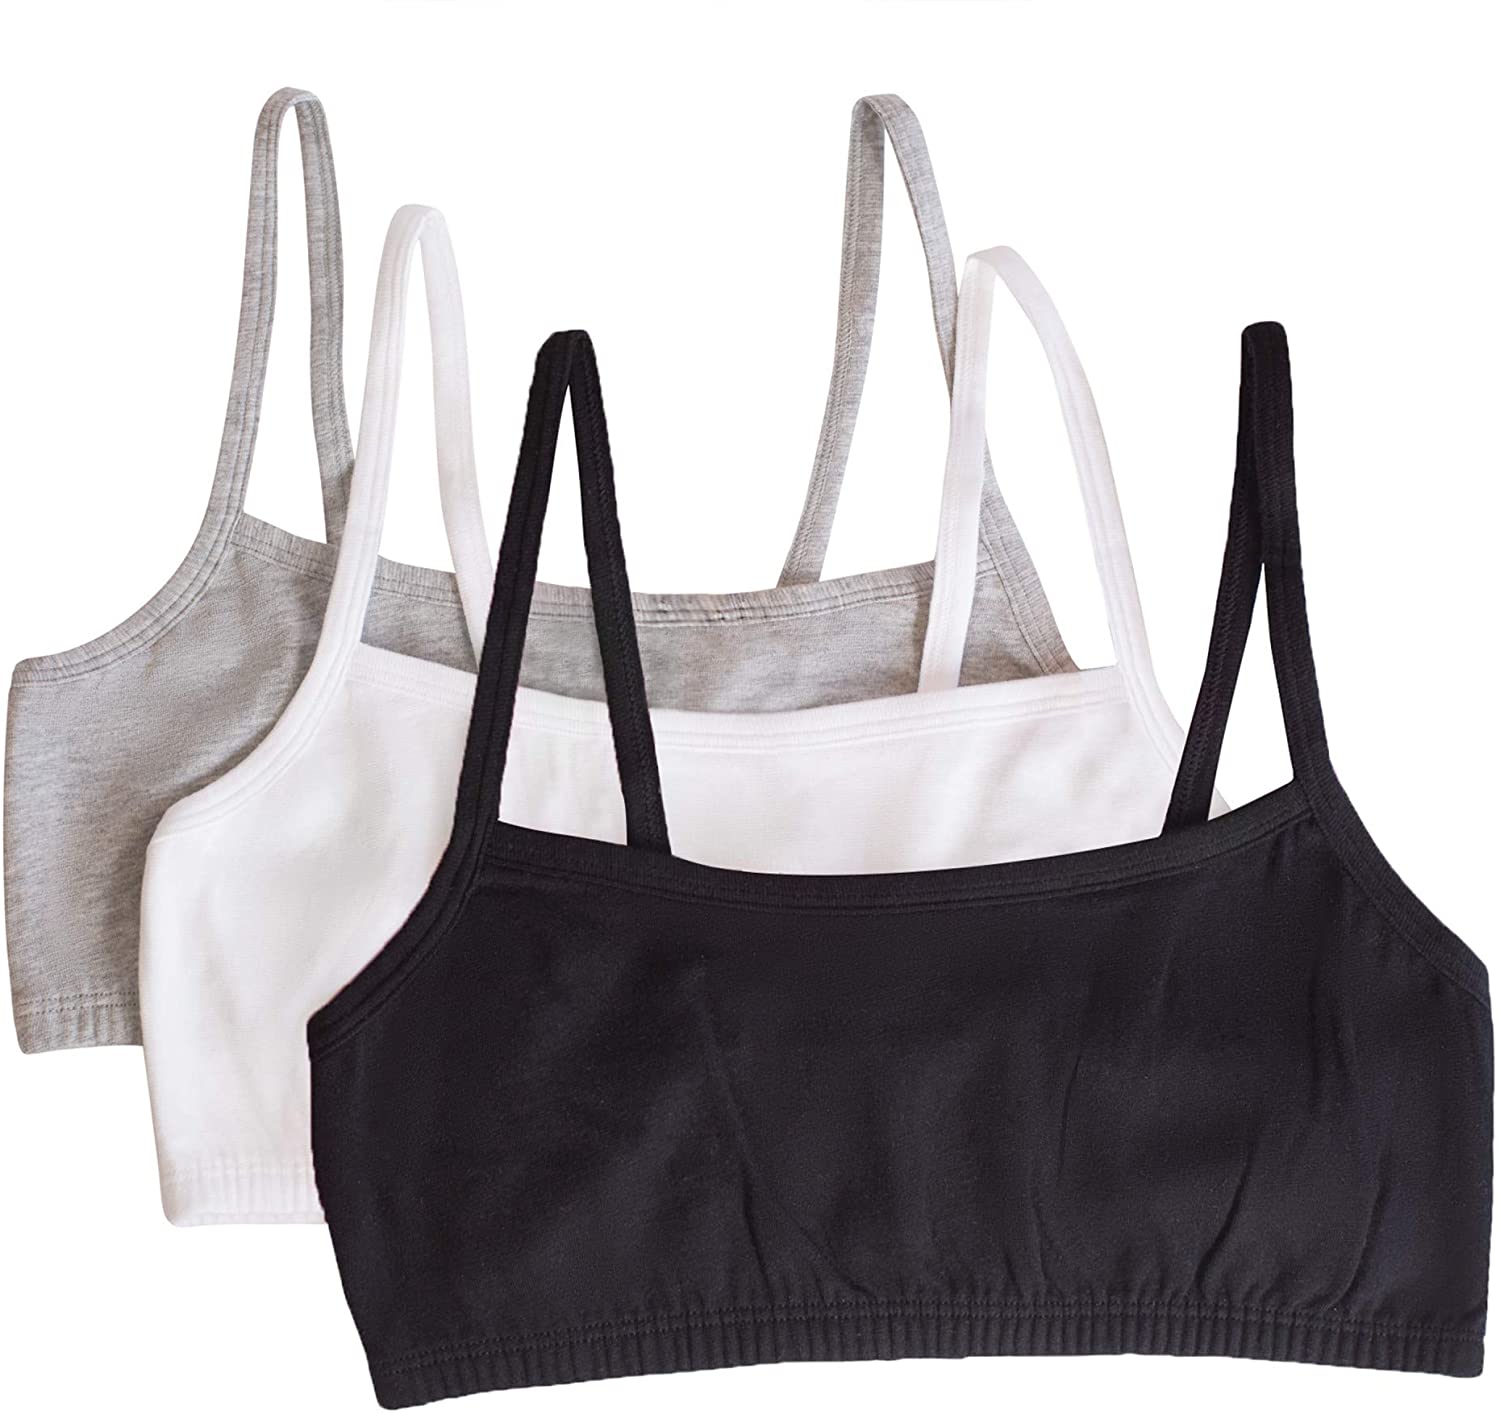 Fruit of the Loom Womens Cotton Pullover Sport Bra Pack of 3 